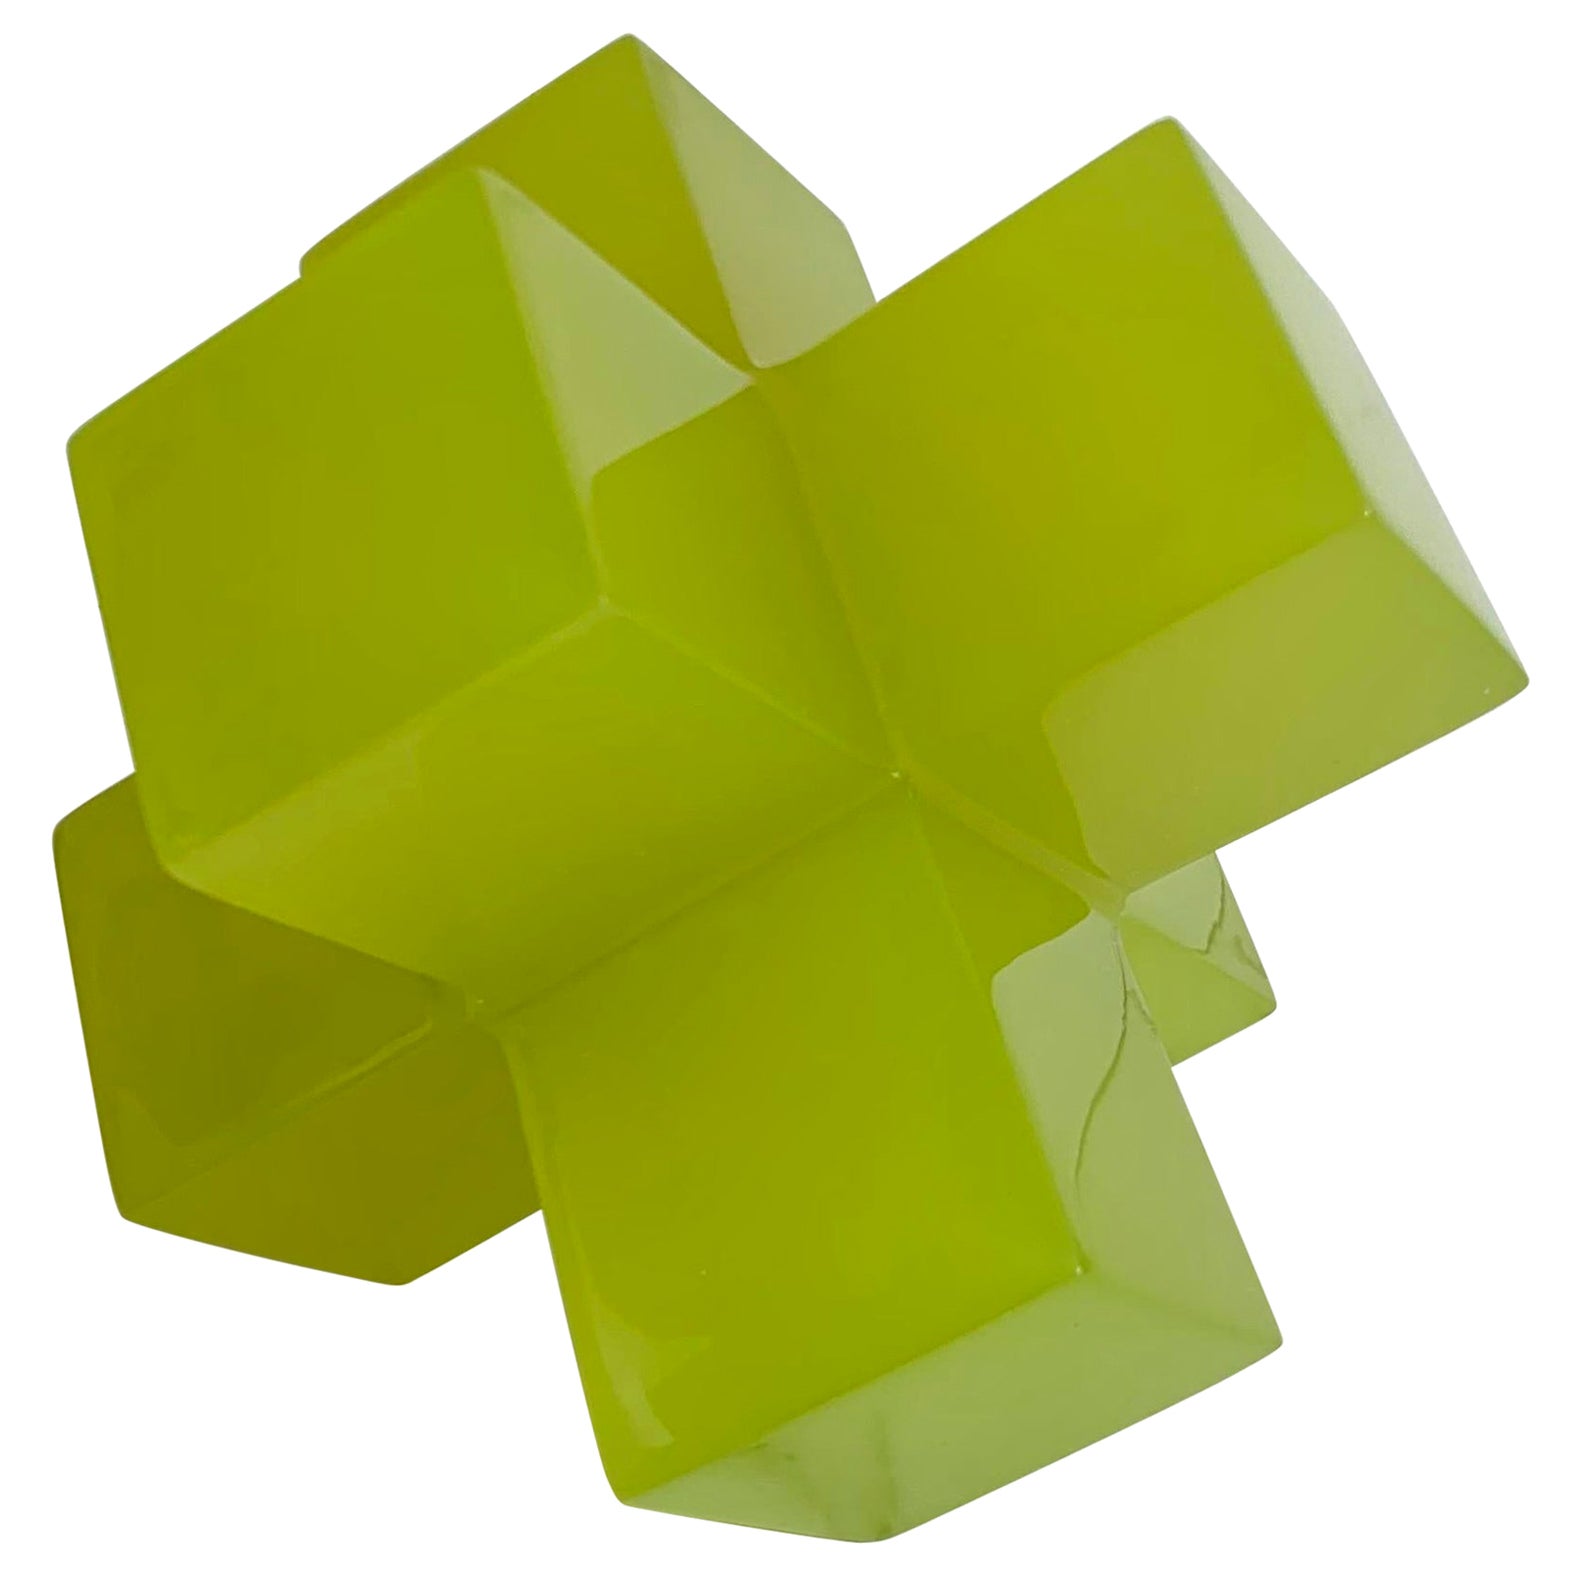 Geometric Sculpture in Polished Lime Green Resin by Paola Valle For Sale